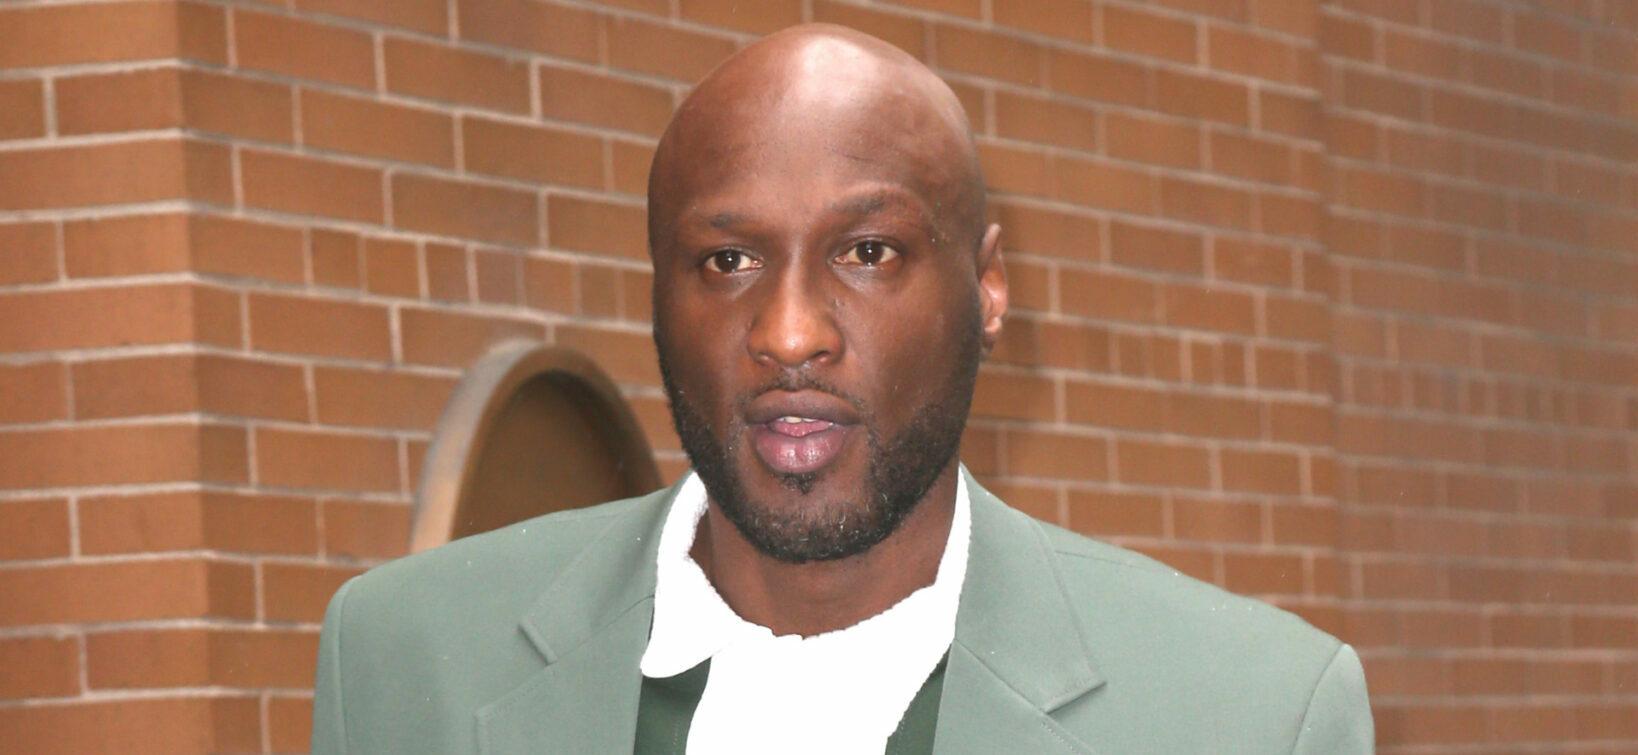 Lamar Odom Reflects On Marriage To Khloé Kardashian While Defending Will Smith